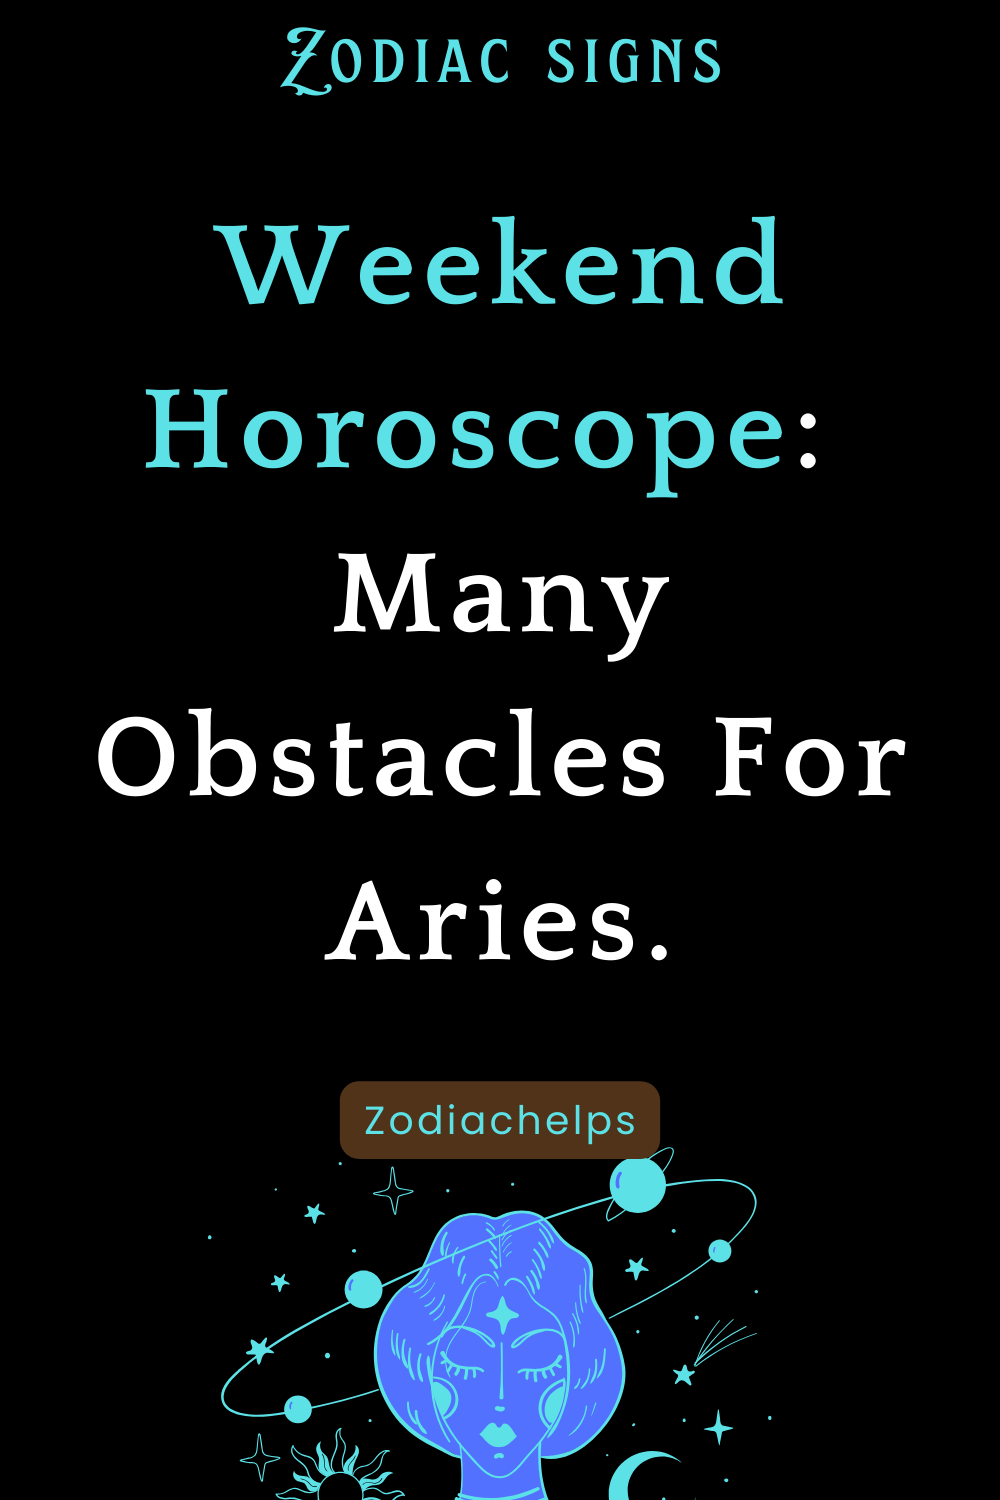 Weekend Horoscope: Many Obstacles For Aries.